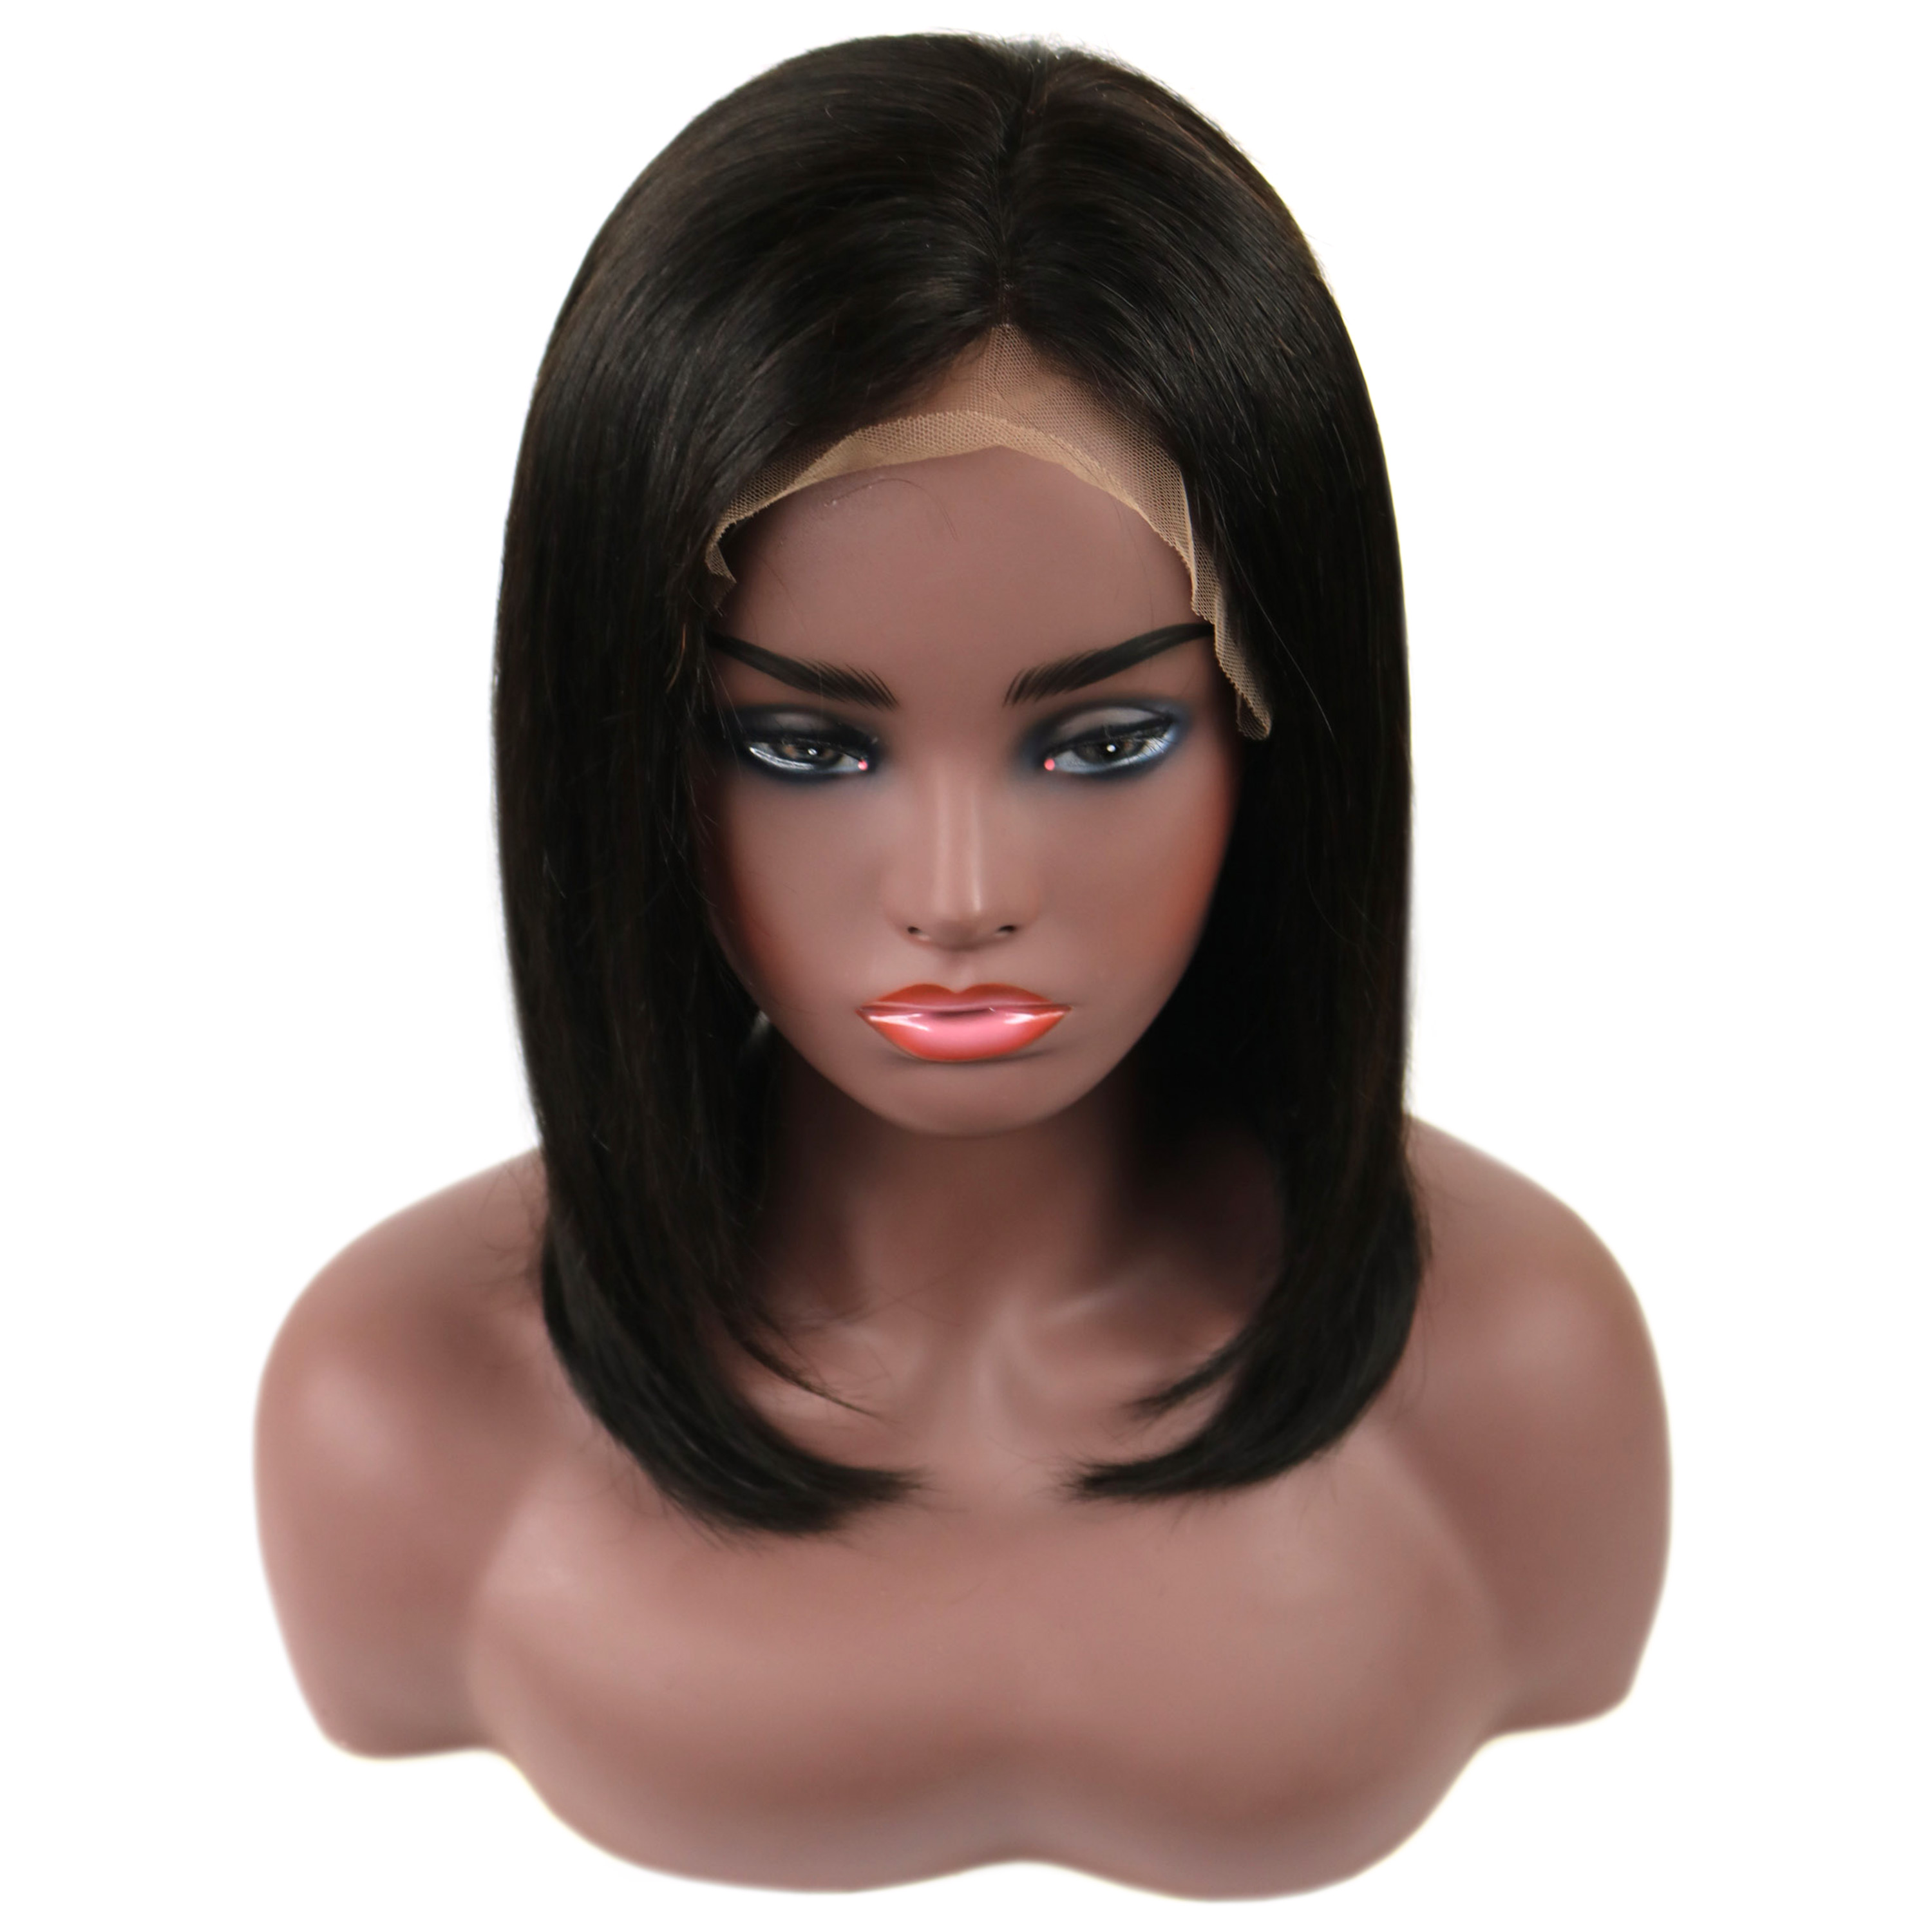 Straight Human Hair Lace Front Cap 120% 14 Inches Wigs